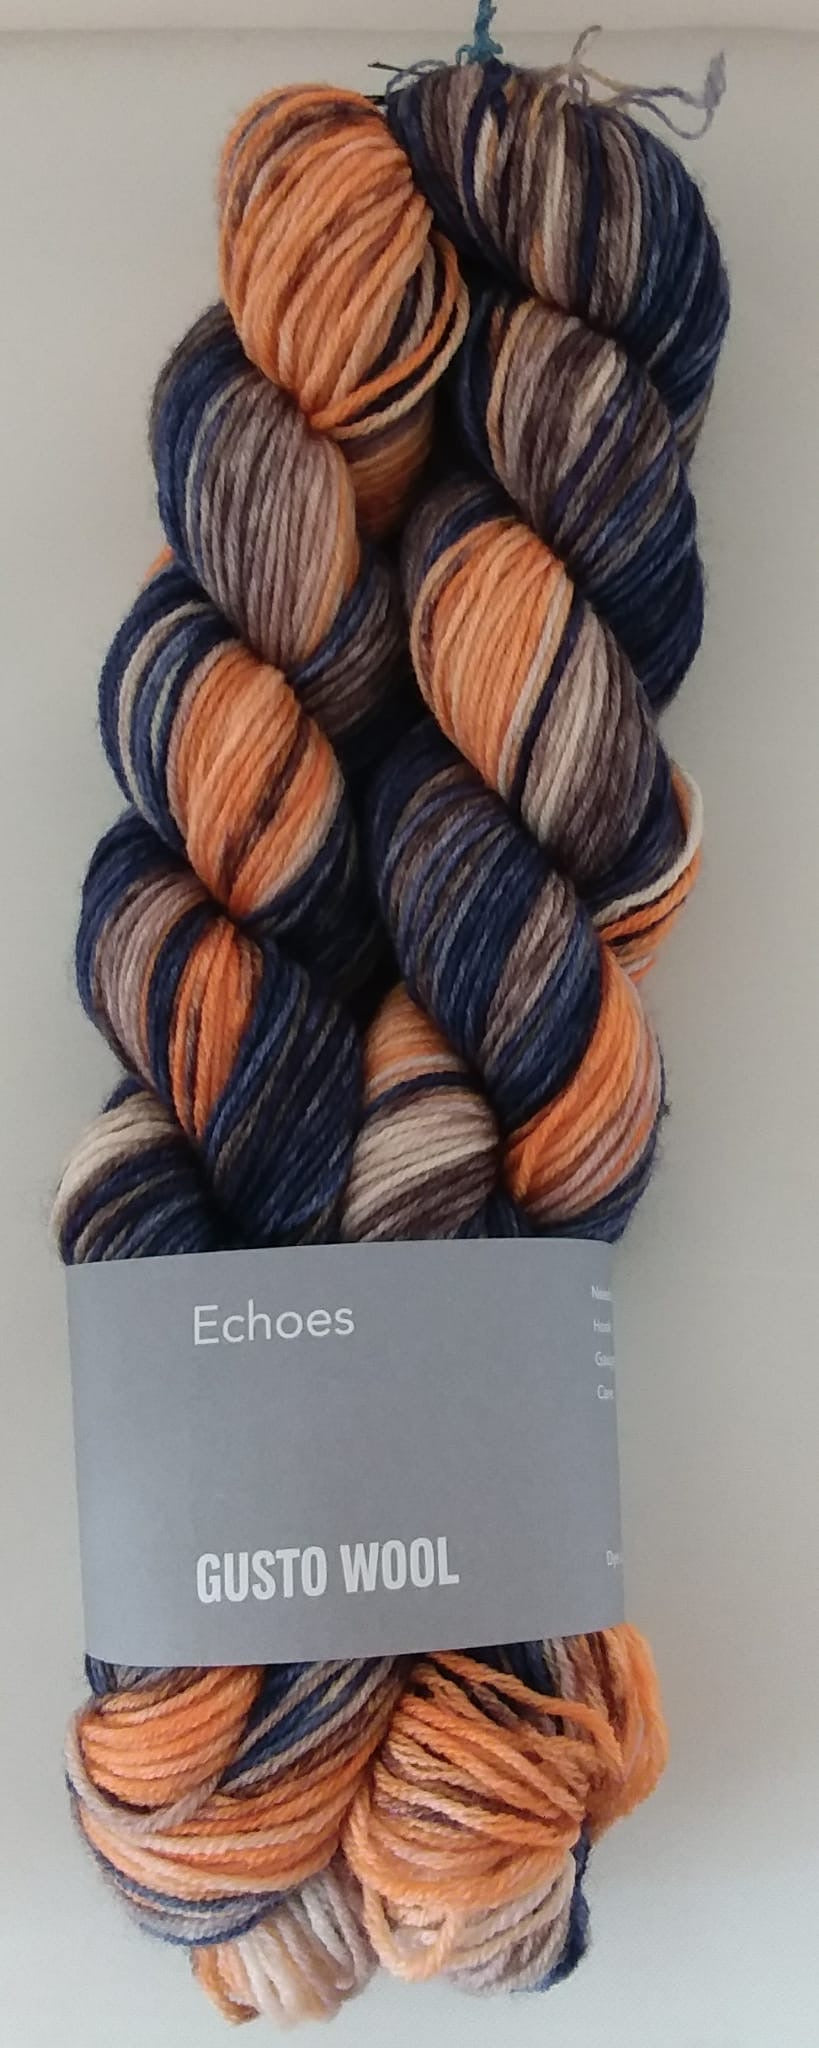 Gusto Wool| Echoes